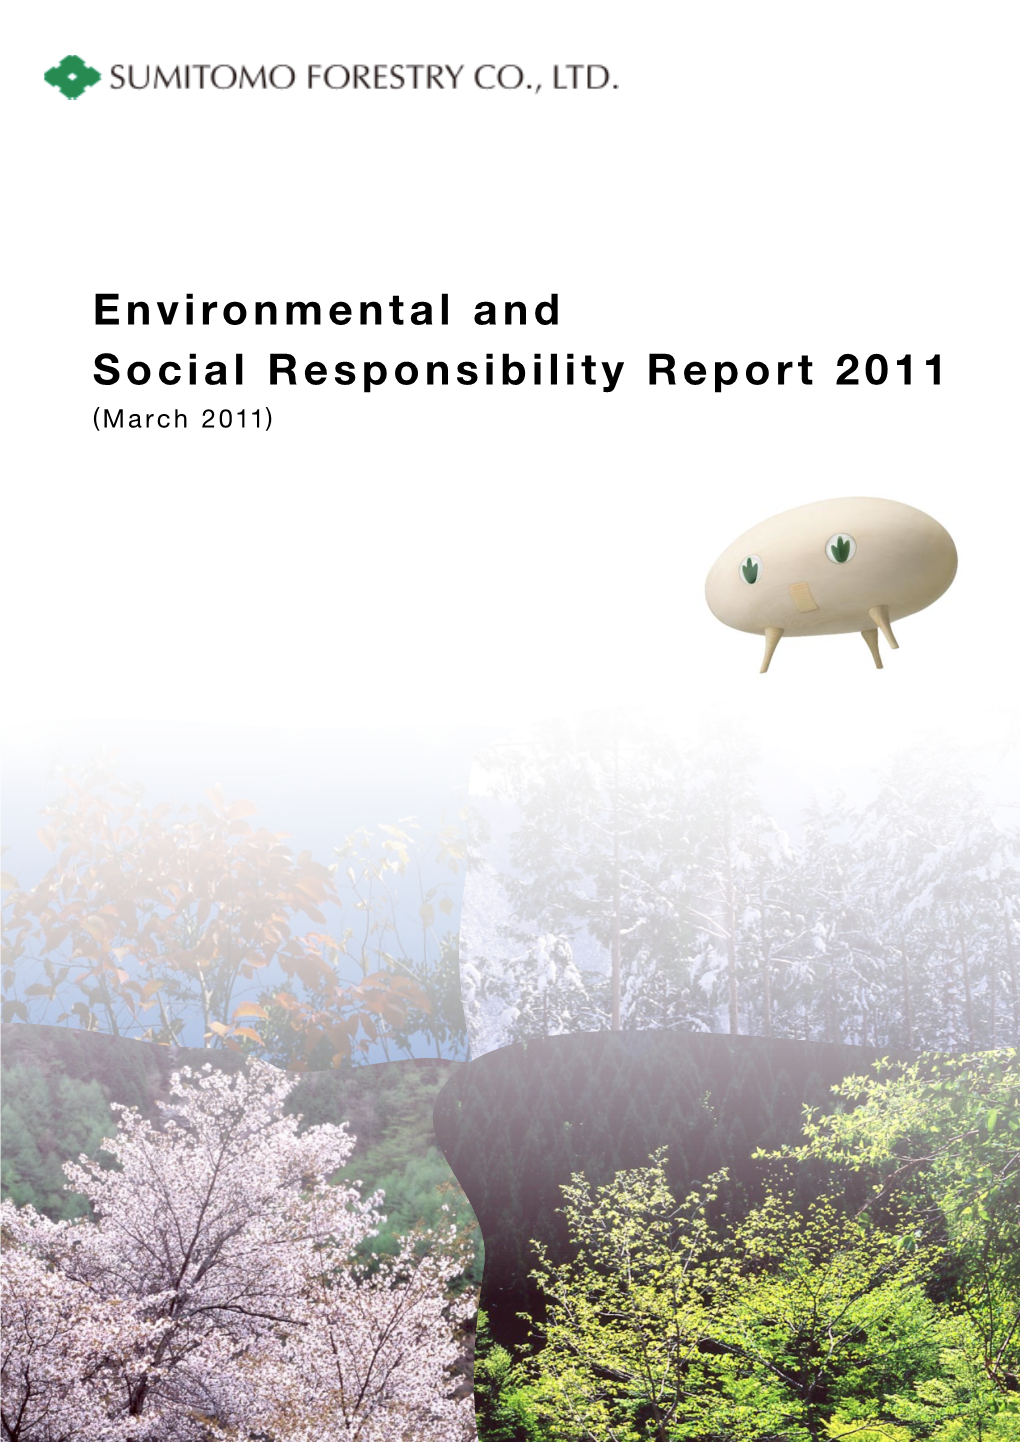 Environmental and Social Responsibility Report 2011 (March 2011) Contents